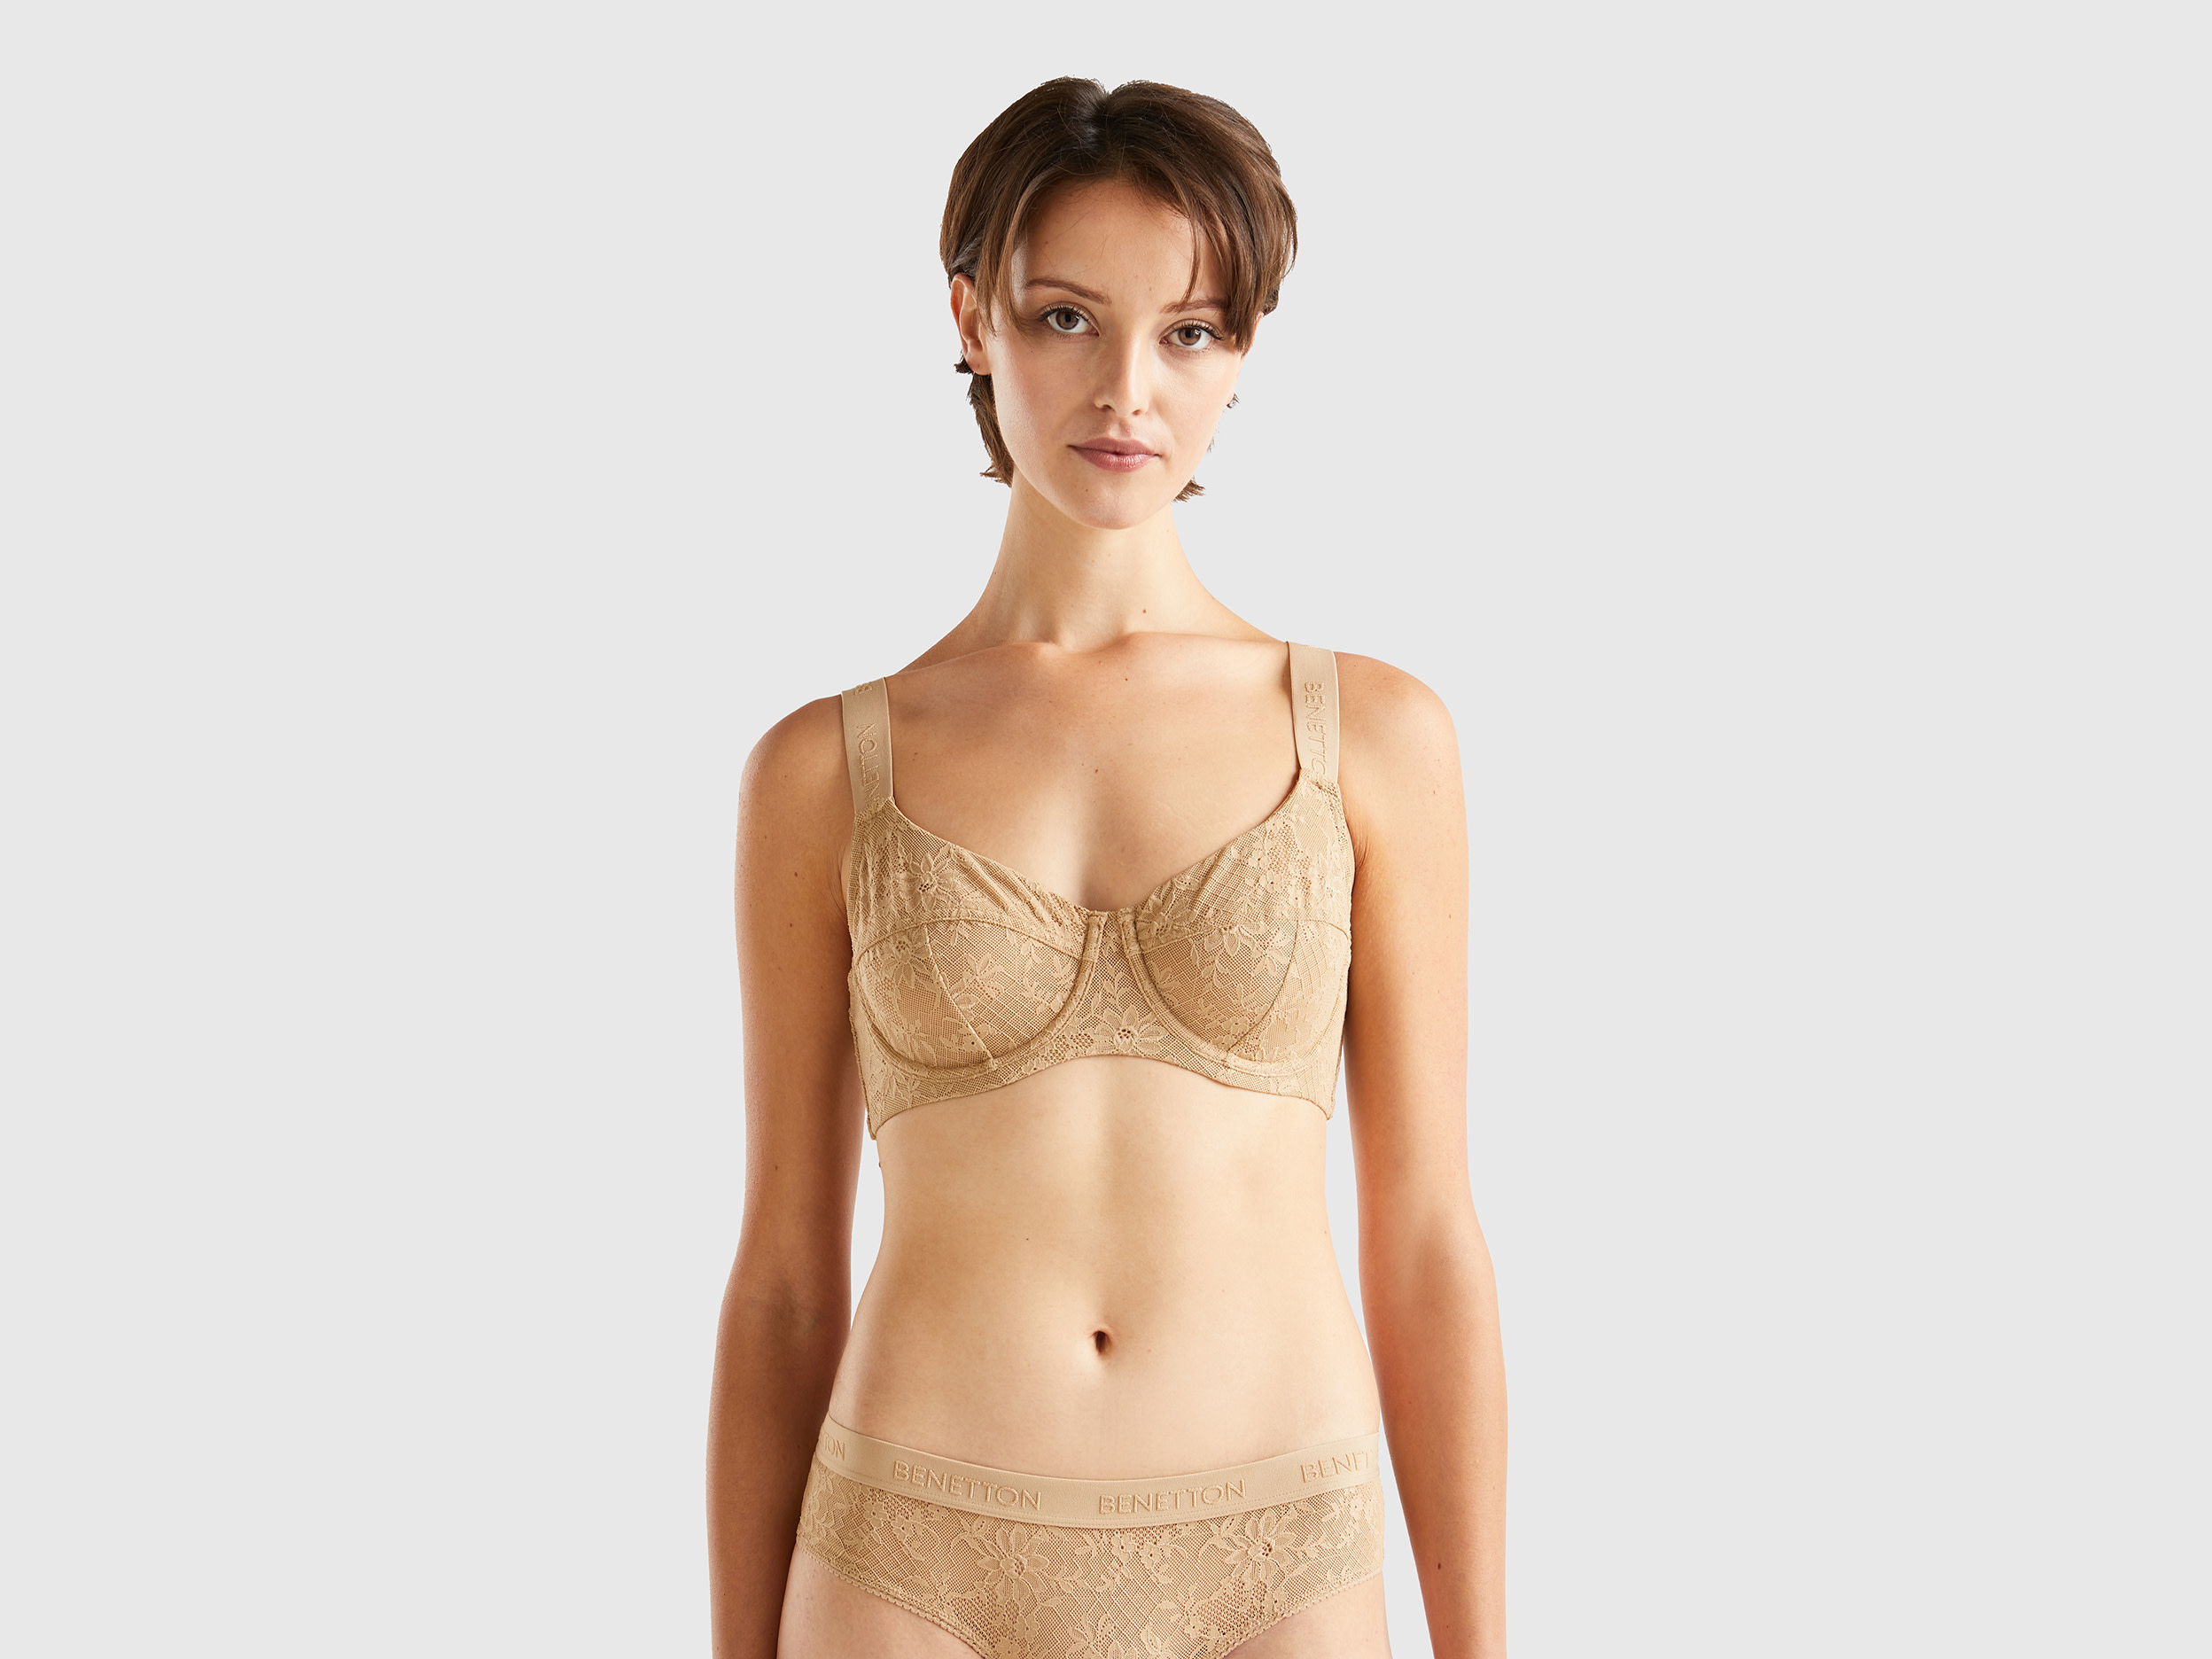 Benetton, C Cup Bra In Stretch Lace, size 36, Camel, Women